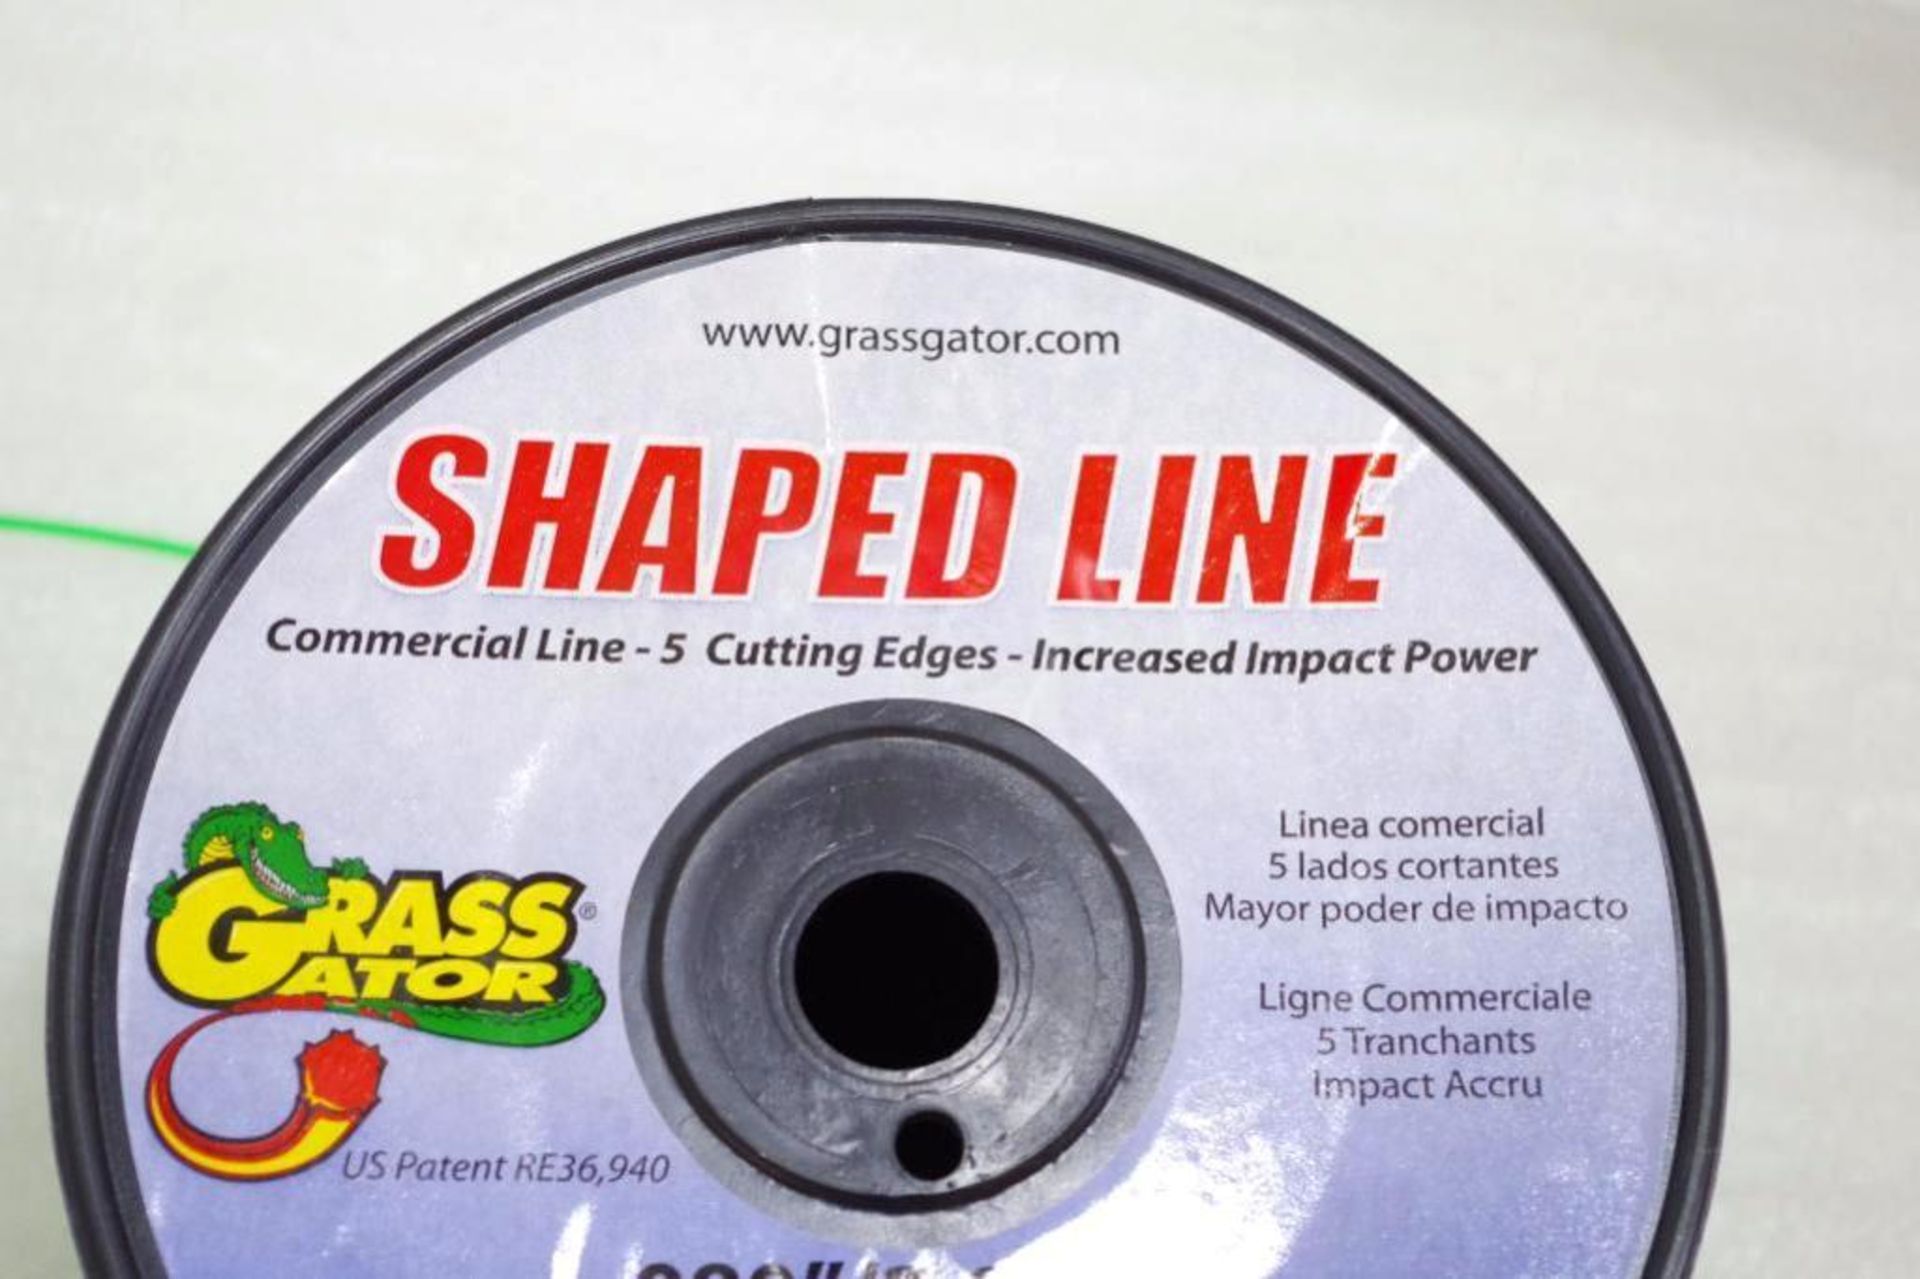 1205' Spool GRASS GATOR .080" Shaped Line, M/N 9080, Made in USA - Image 3 of 5